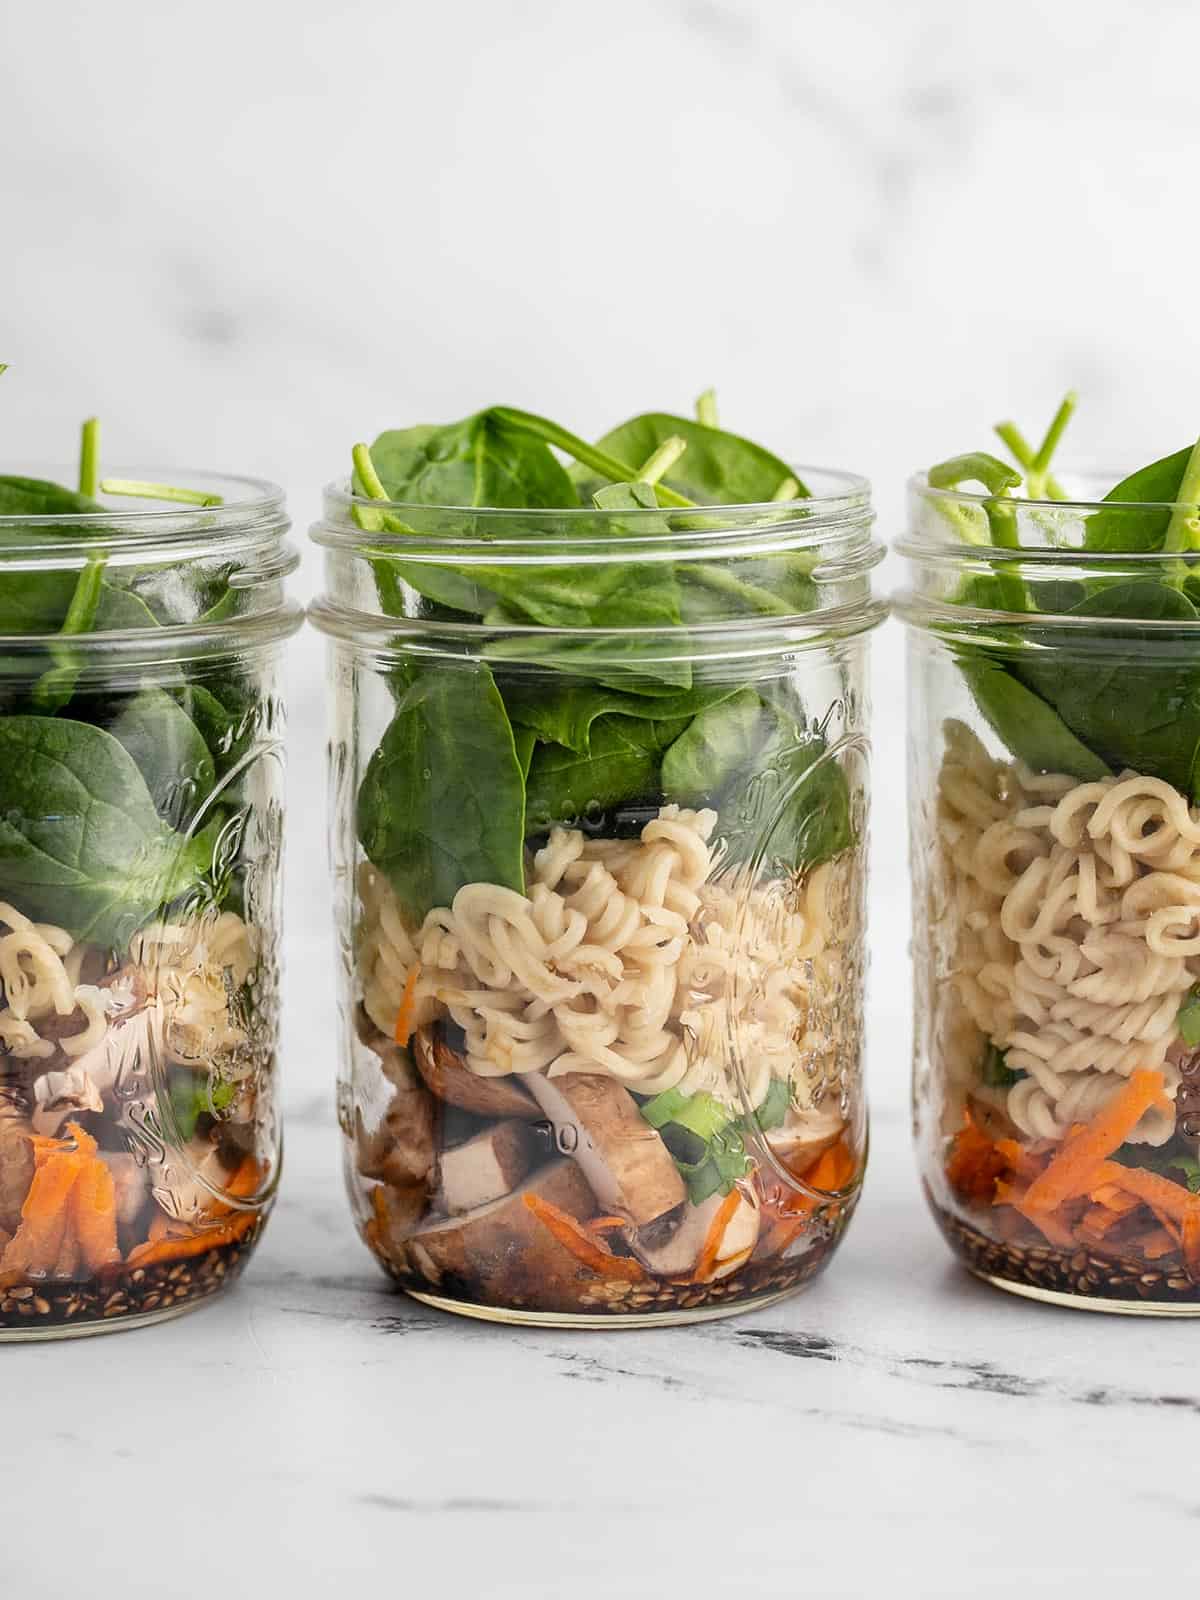 10 Make-Ahead Lunch-In-A-Jar Recipes That Aren't Salad